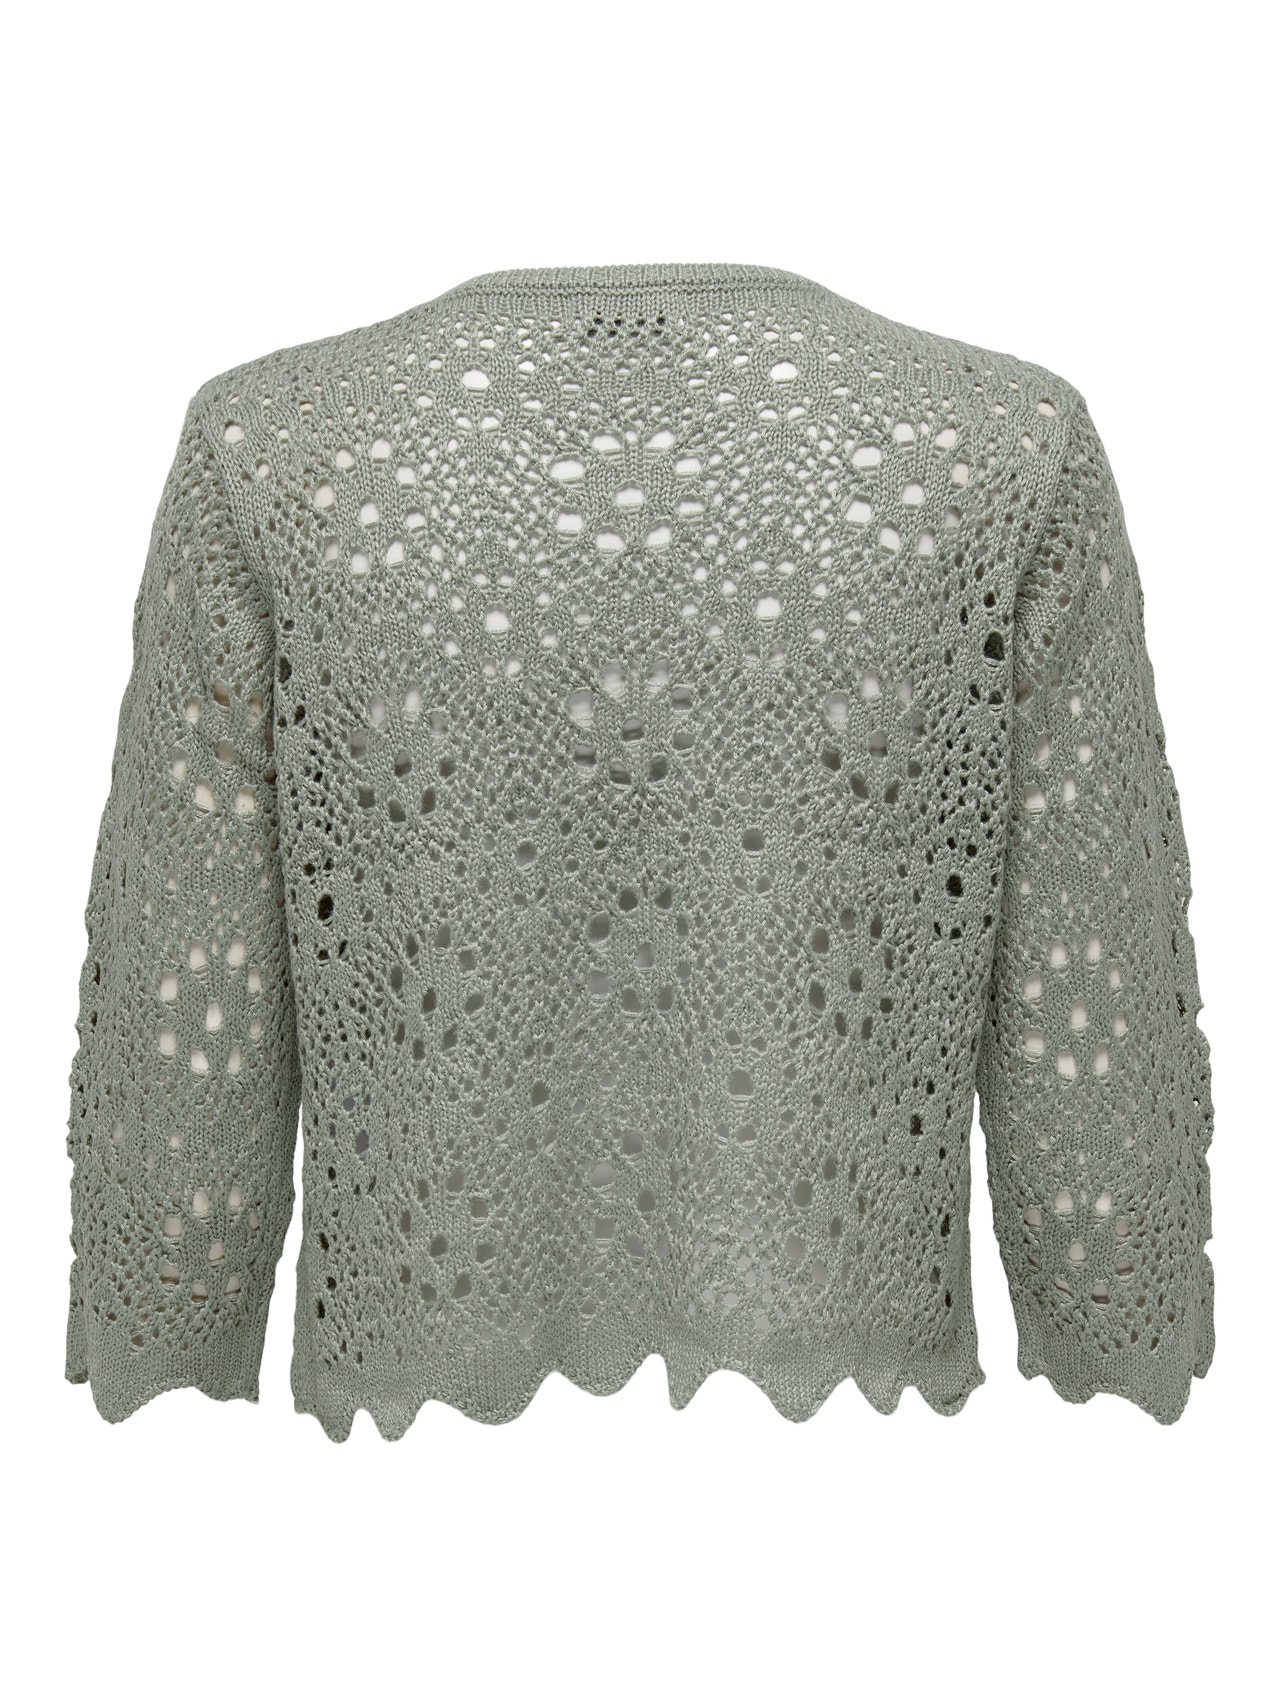 ONLY Texture Knitted Pullover -Seagrass - 15216114